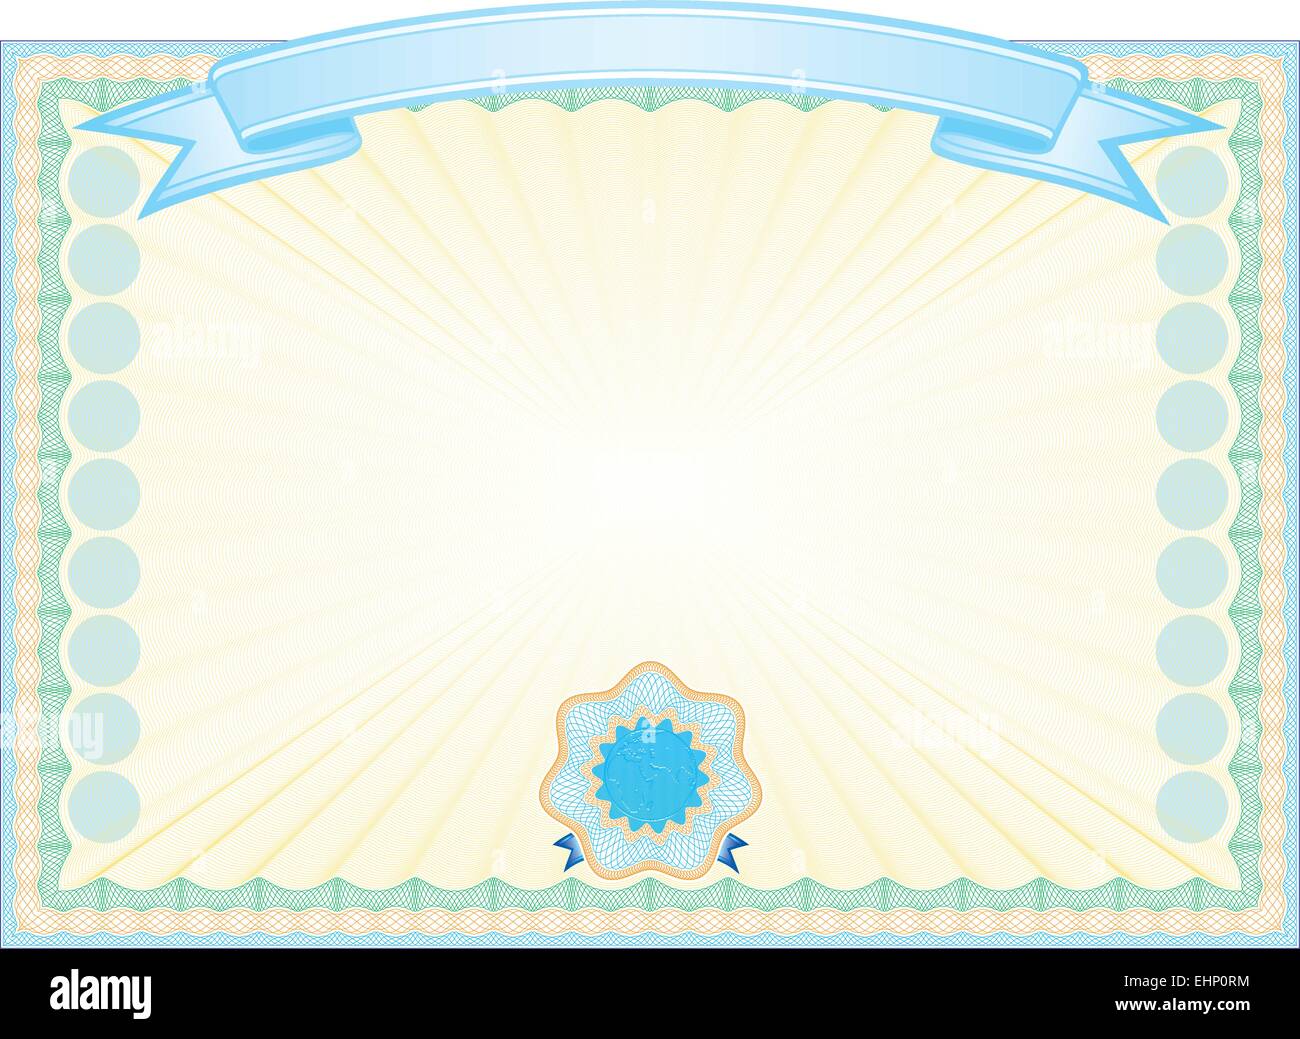 Secured Guilloche certificate background, in vector file elements are in layers for easy editing Stock Vector